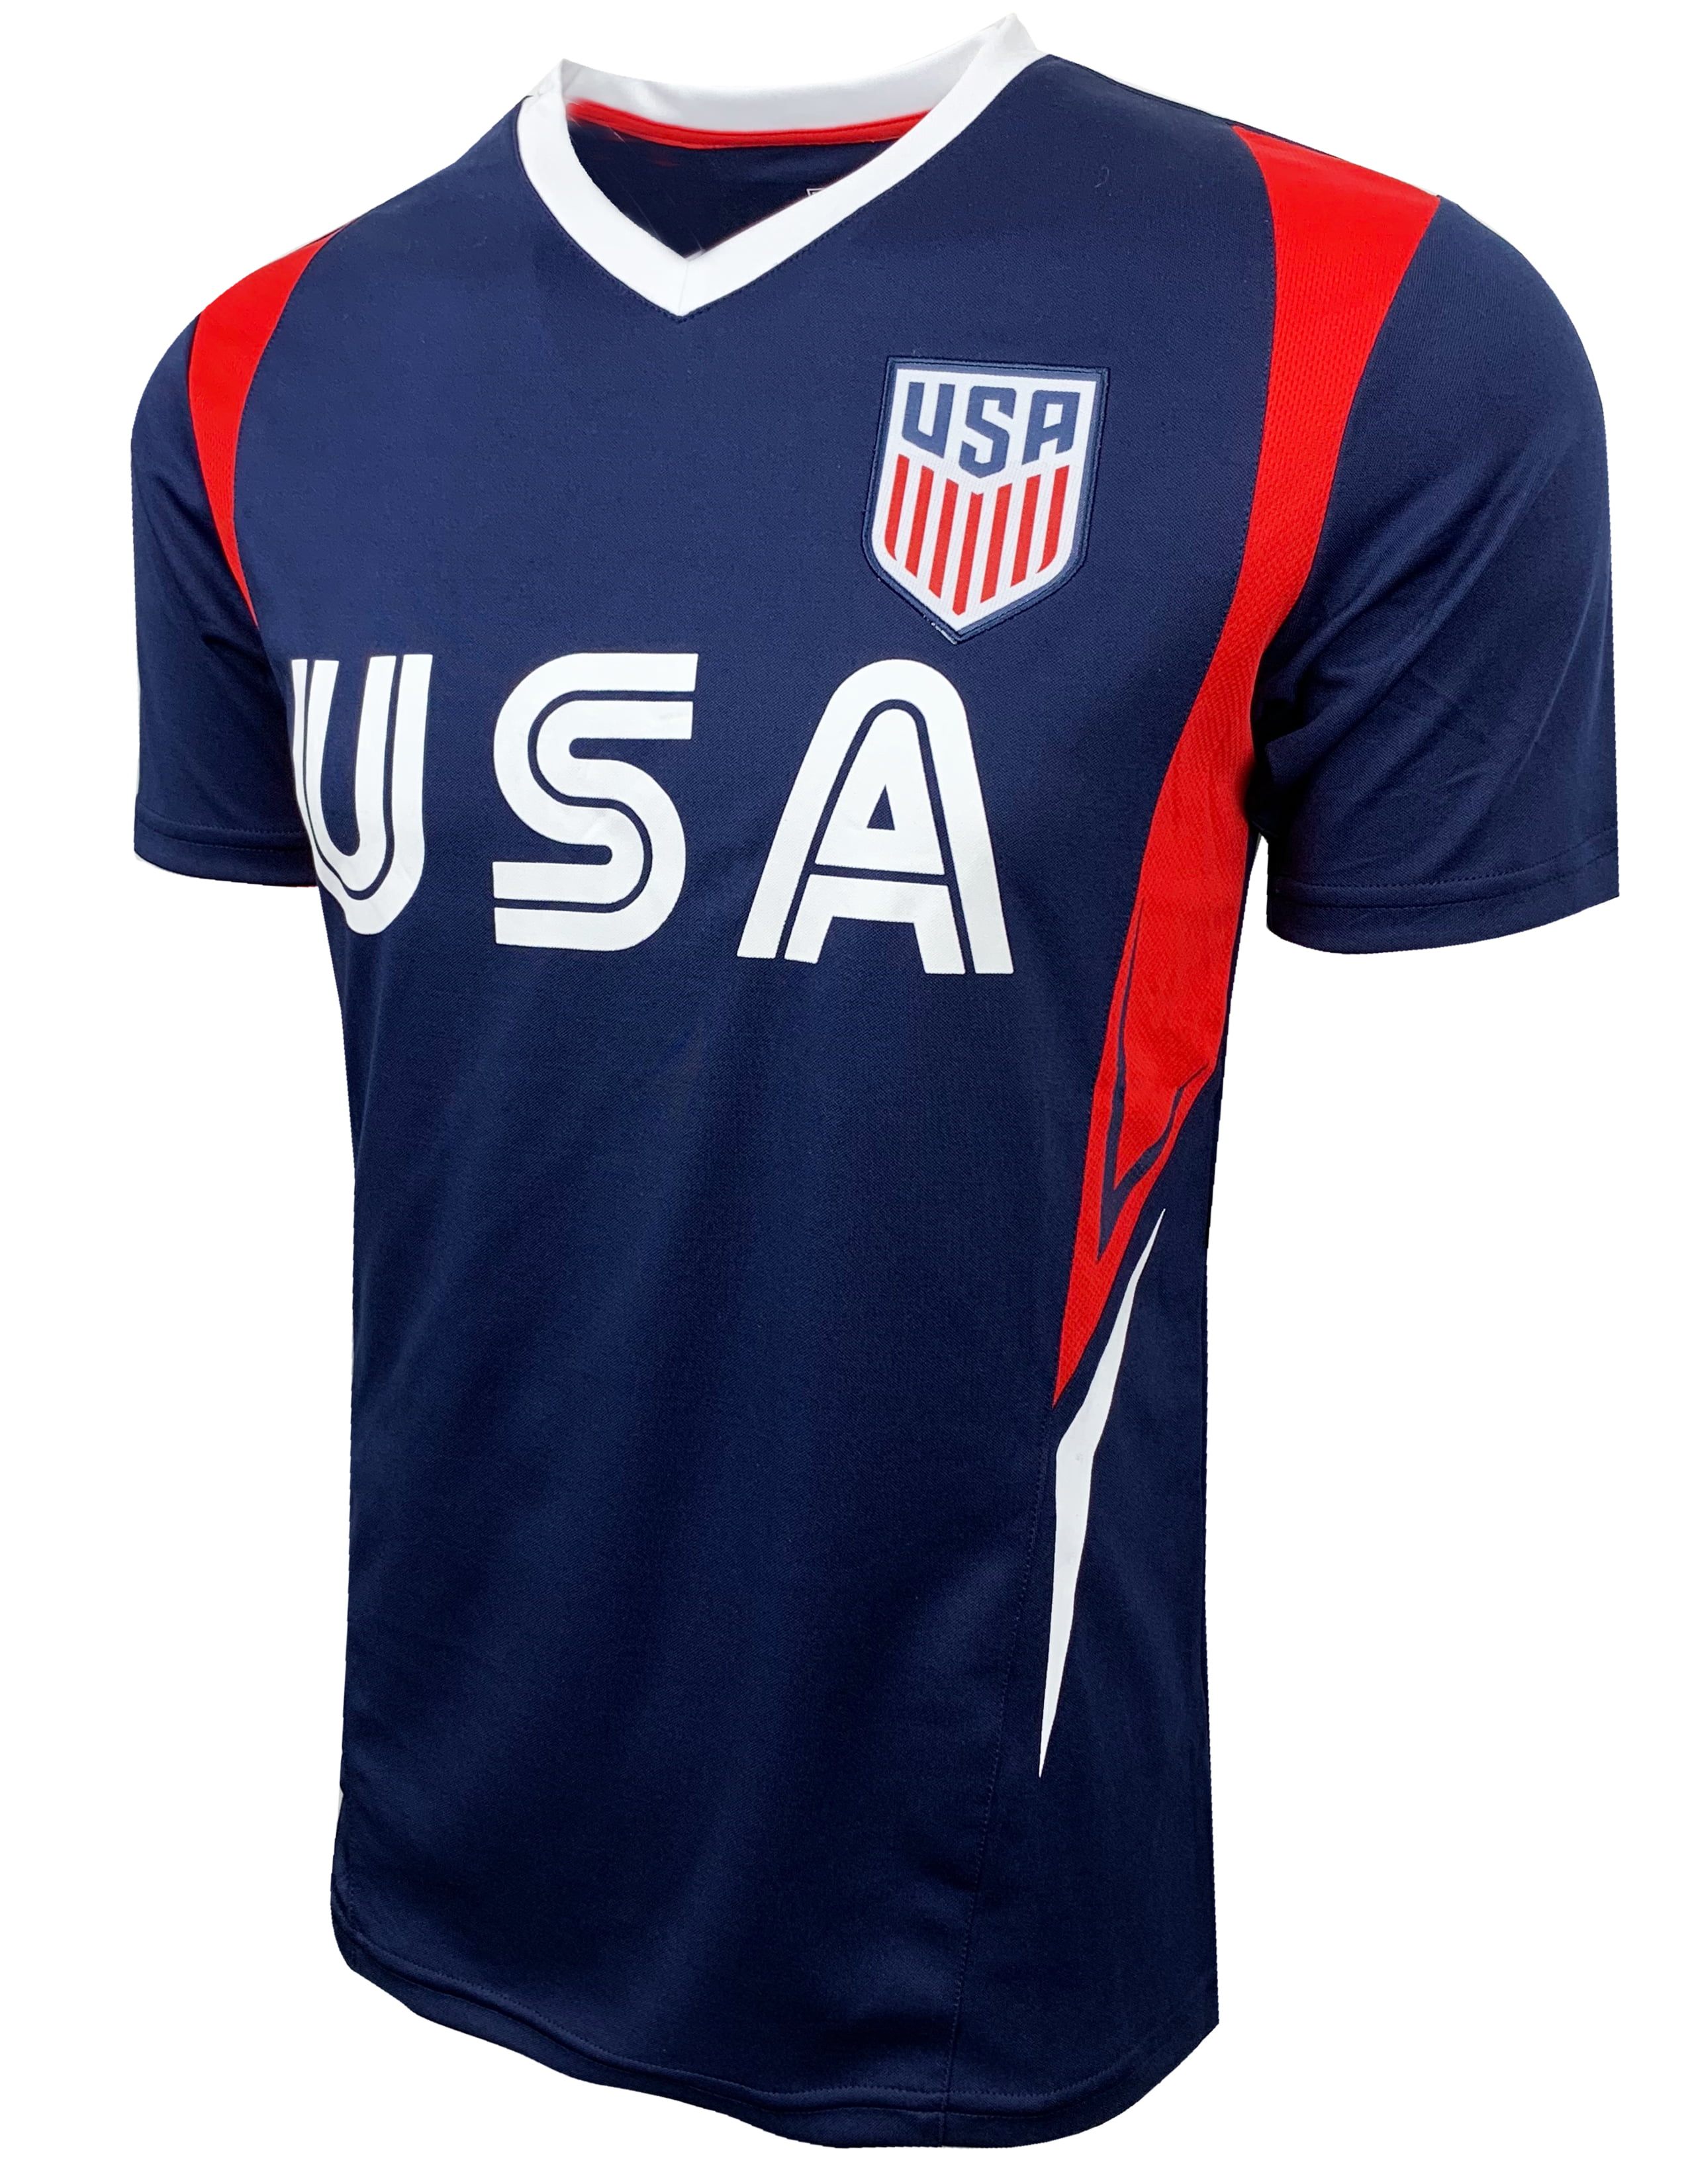 USA Soccer Jersey for Kids and Adults, US Officially Licensed Training Performance Jersey